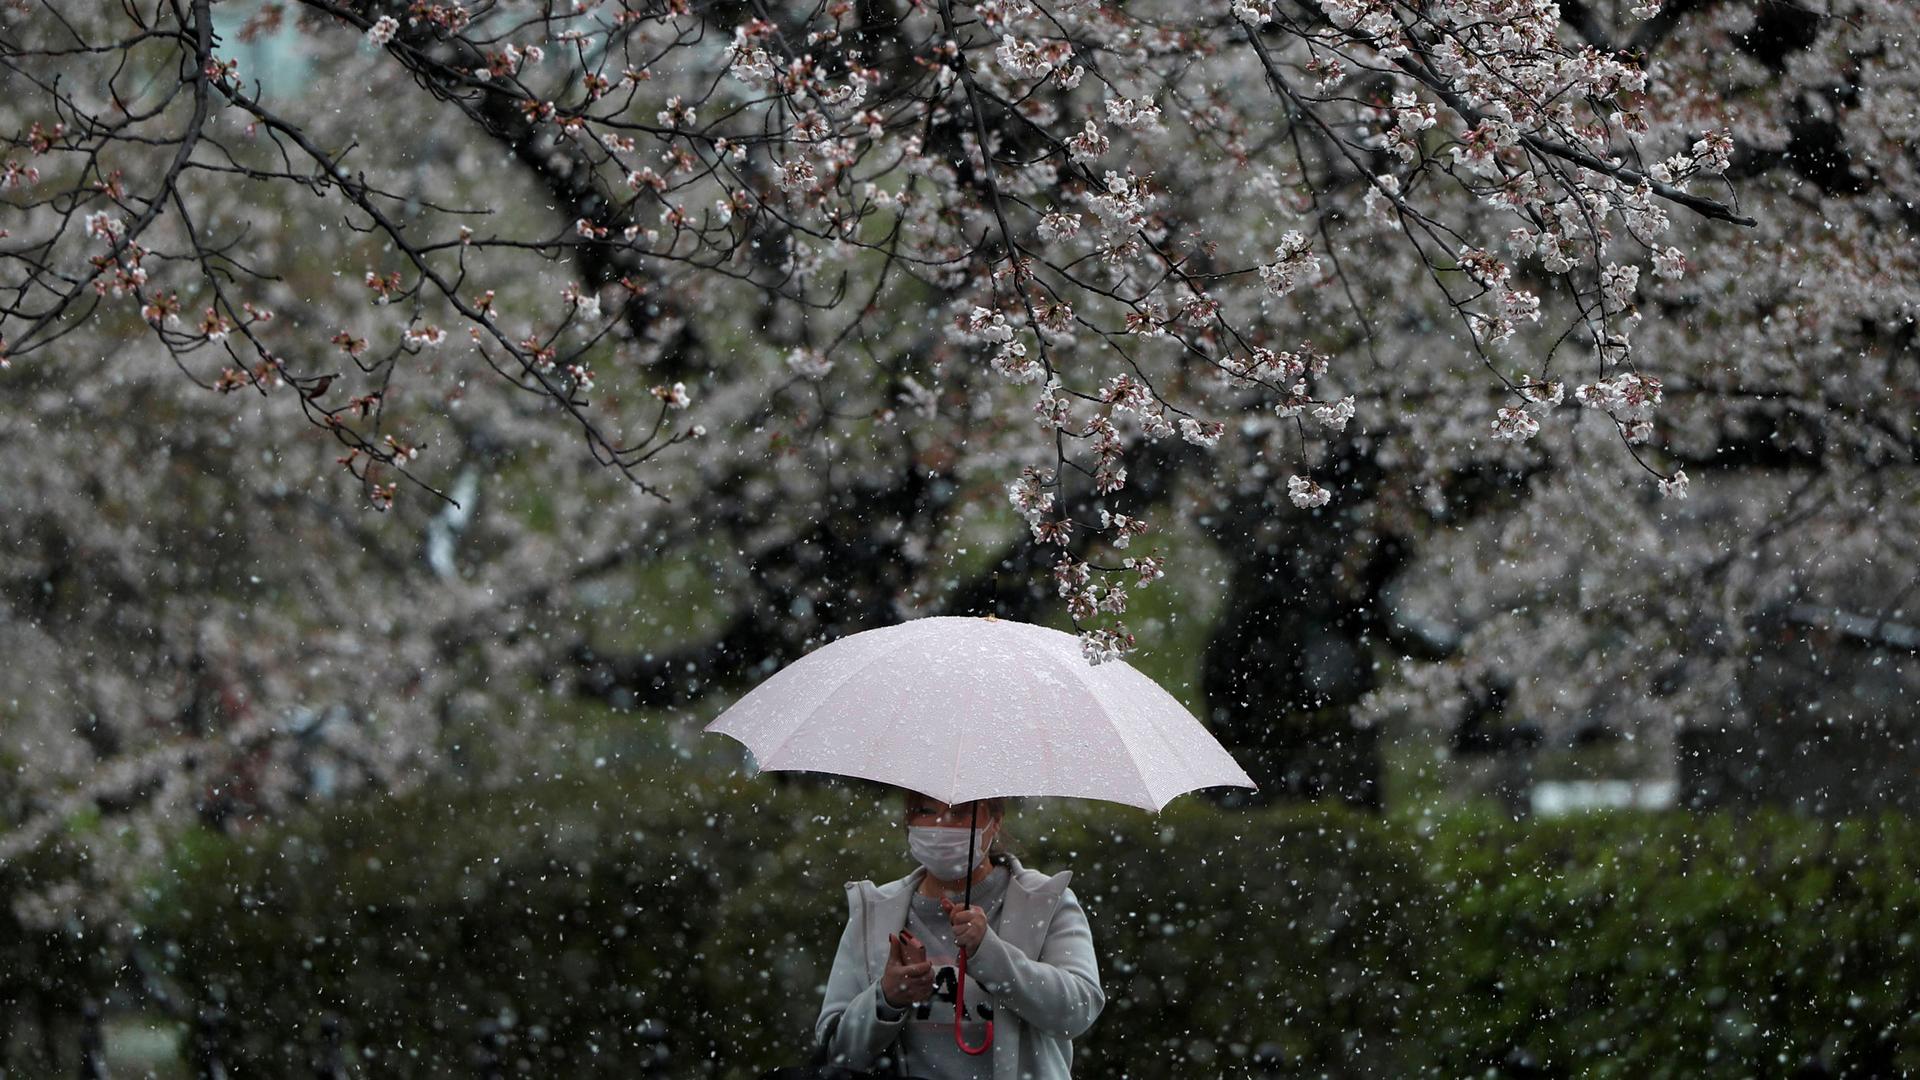 A woman is shown walking with through a area with flowering trees while holding an umbrella.